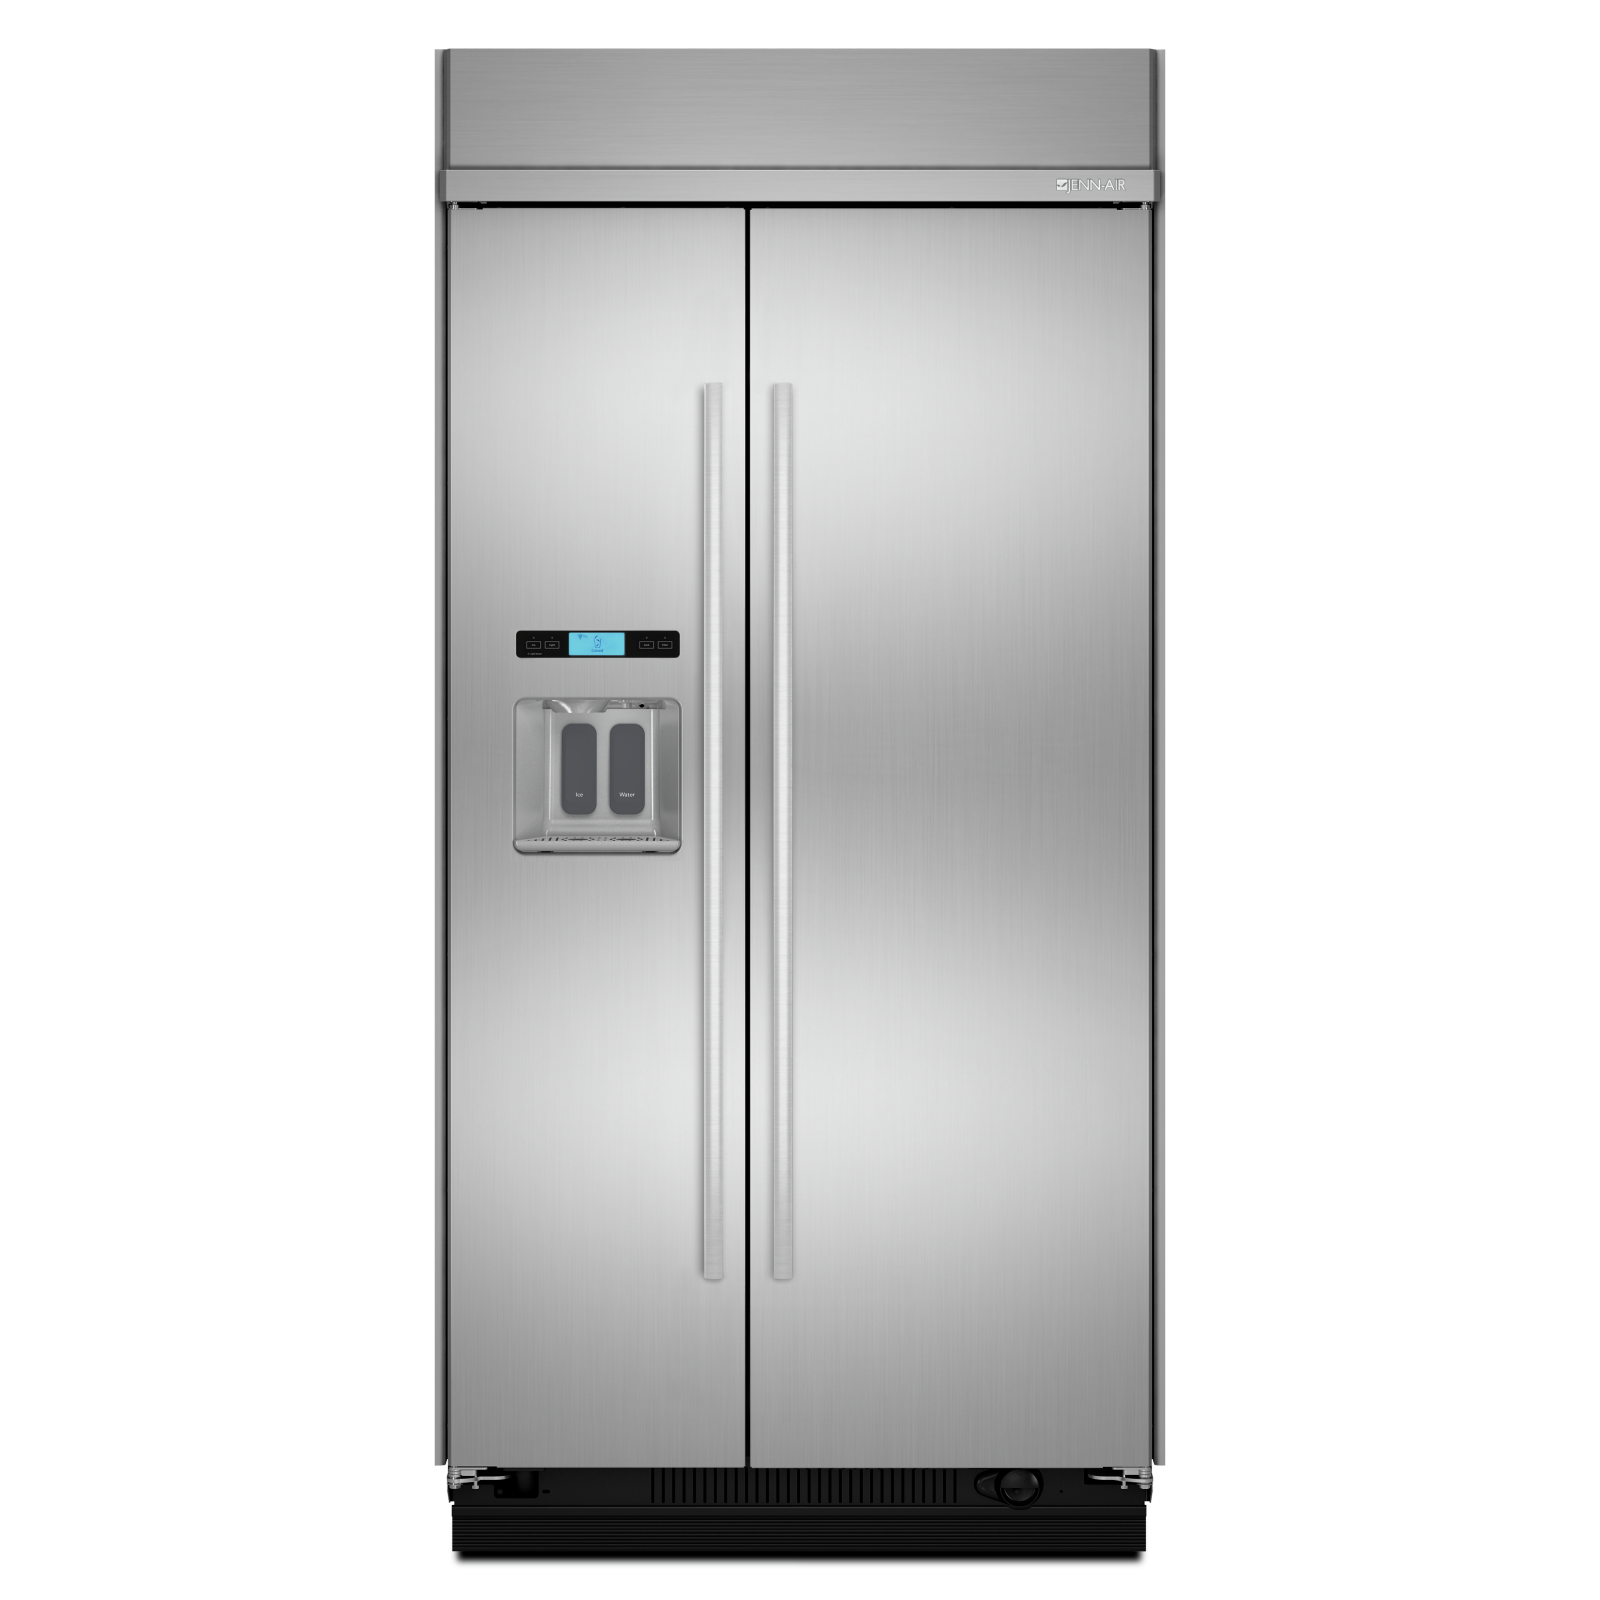 Jennair - 48.4 Inch 29.5 cu. ft Side by Side Refrigerator in Stainless